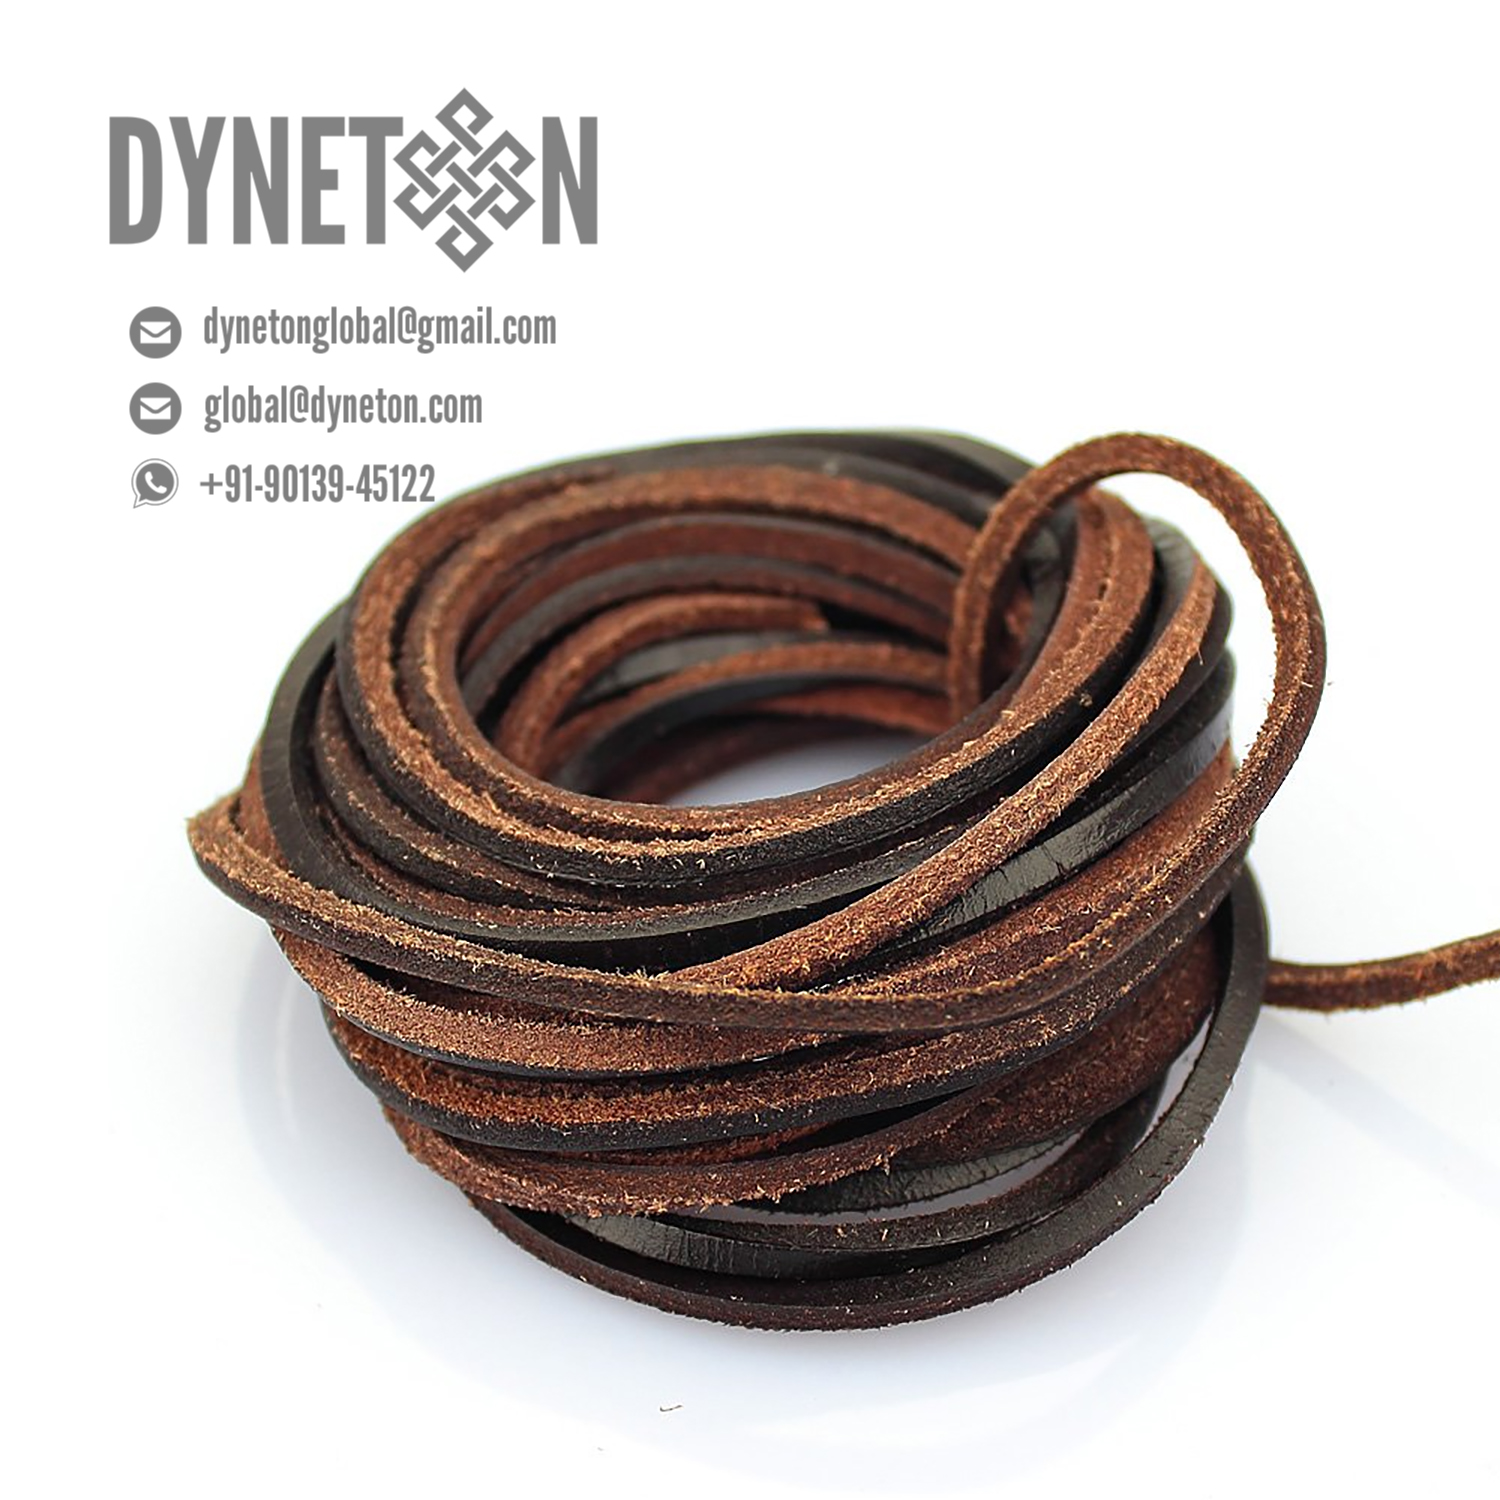 3mm Flat Leather Cord - DYNETON / Flat Leather Cords 3 mm